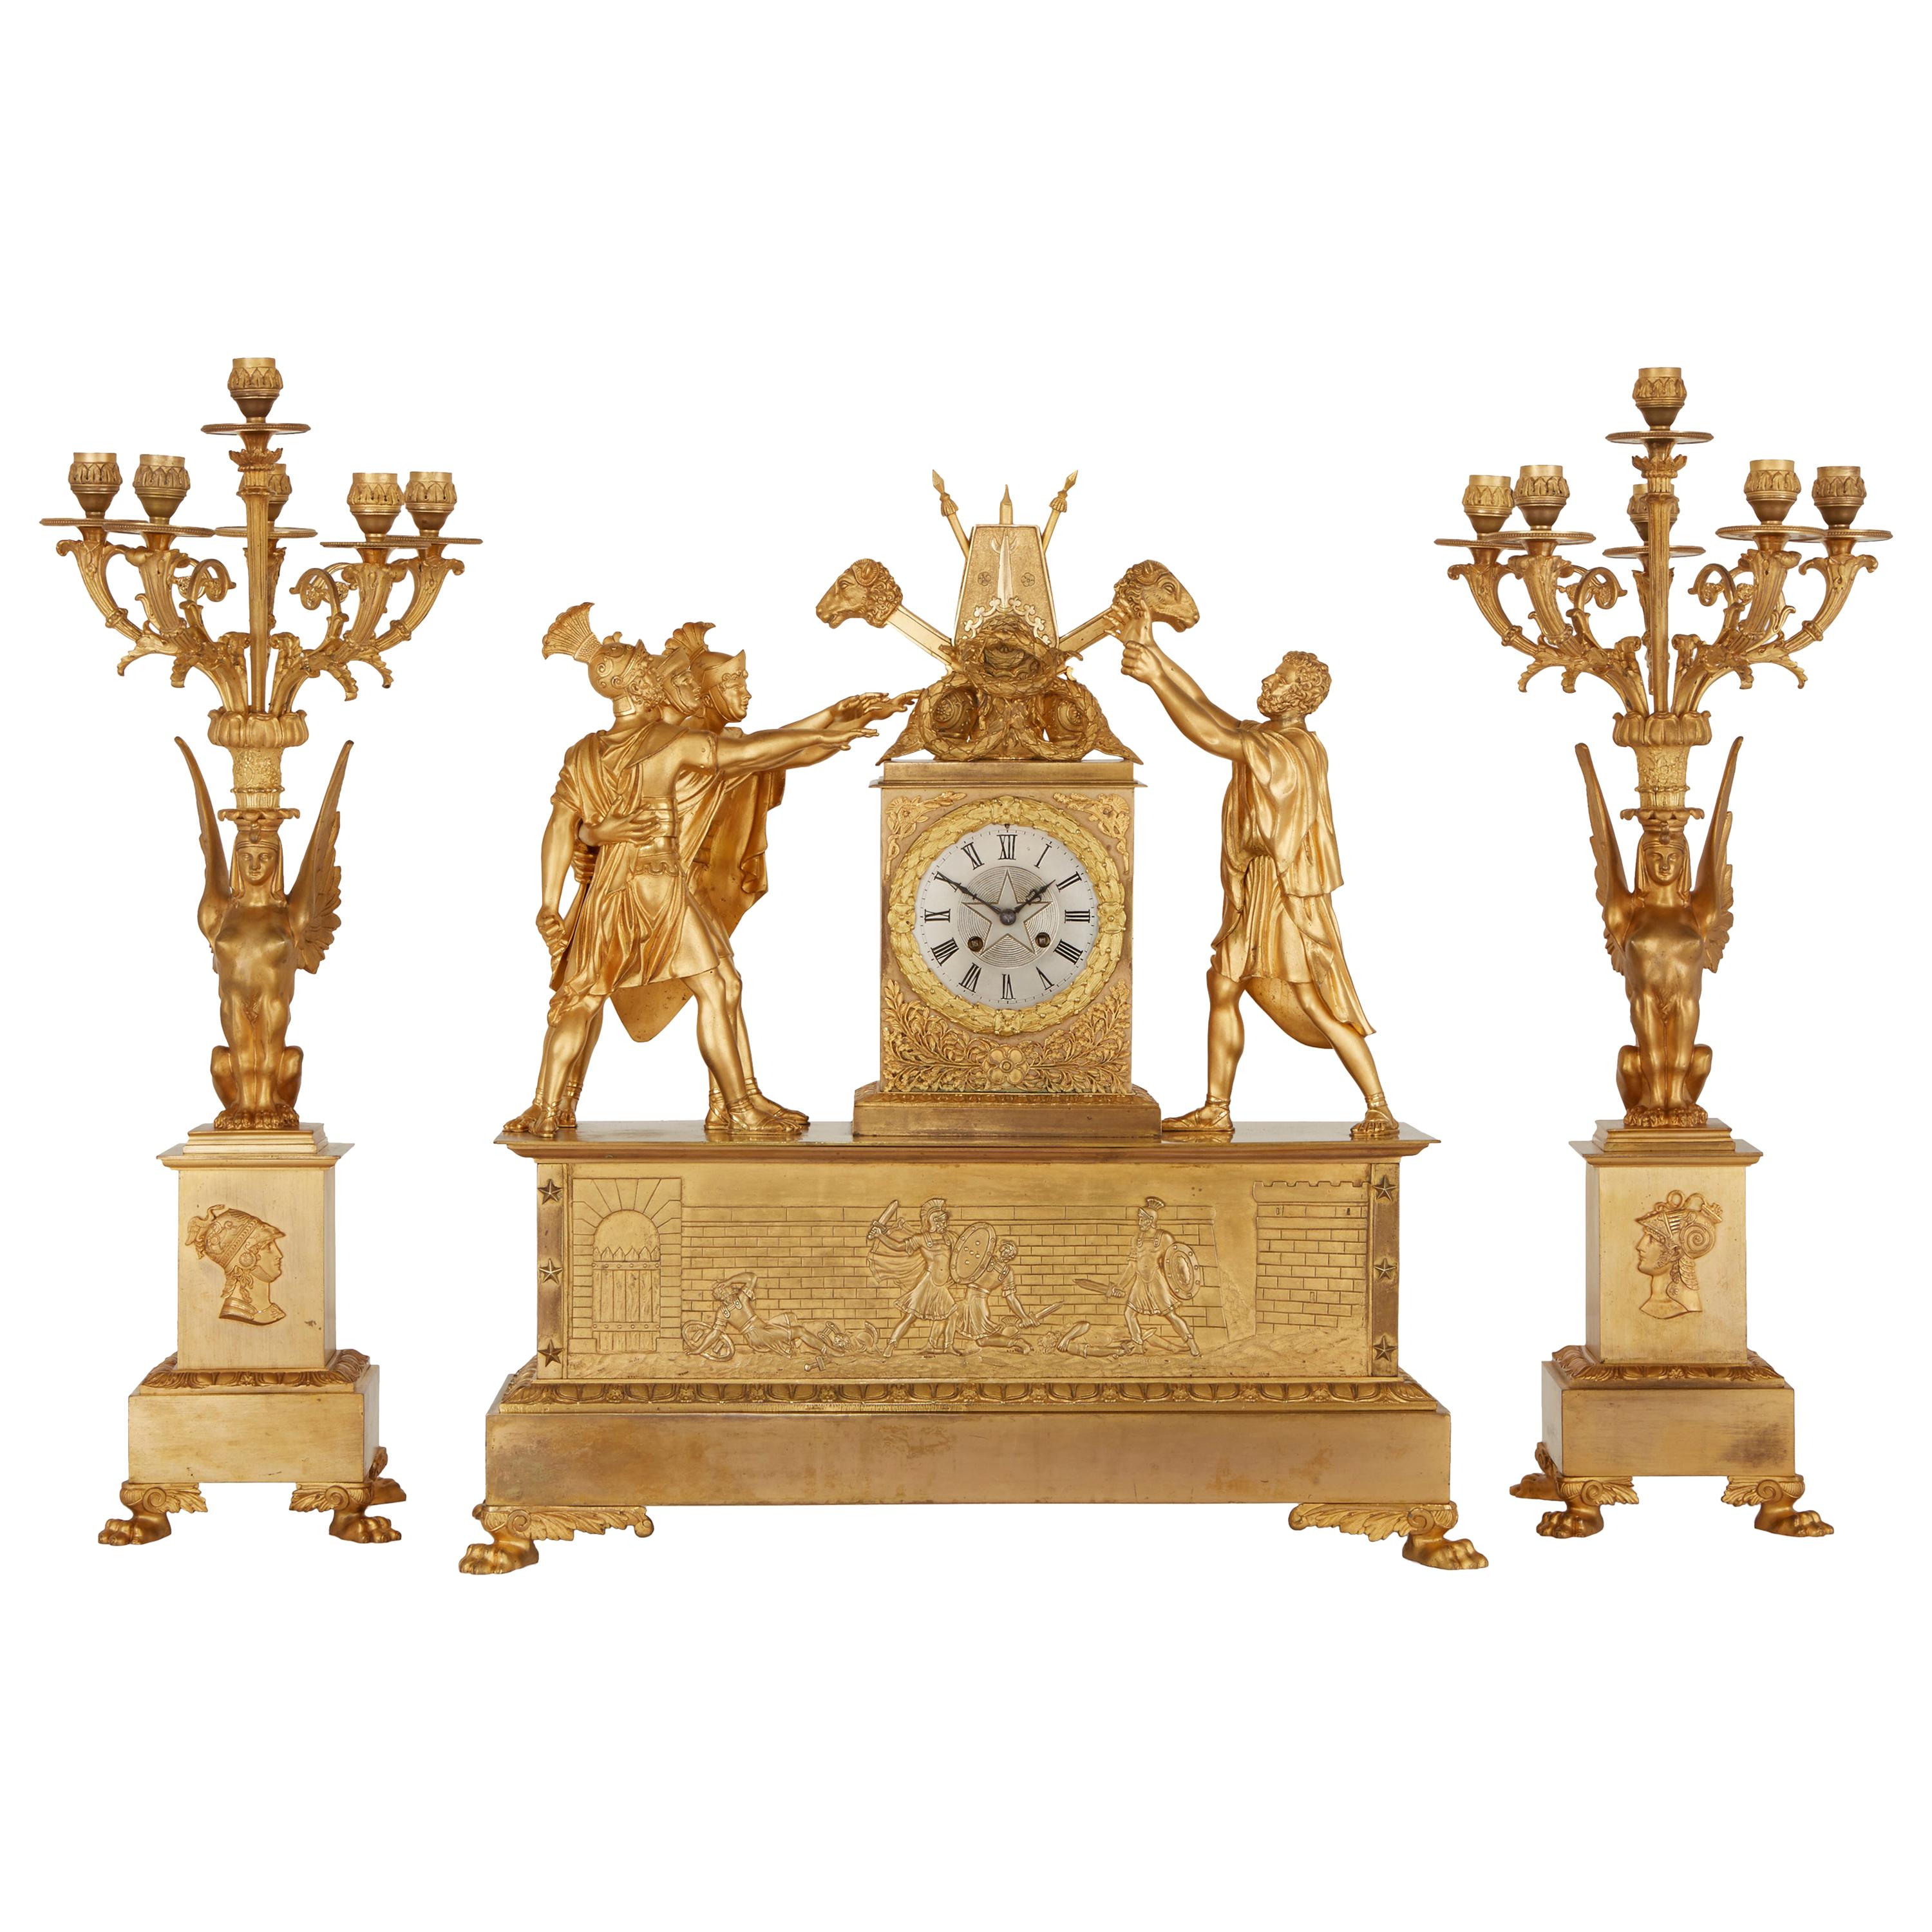 Empire Style Ormolu Clock Set Depicting the Oath of the Horatii